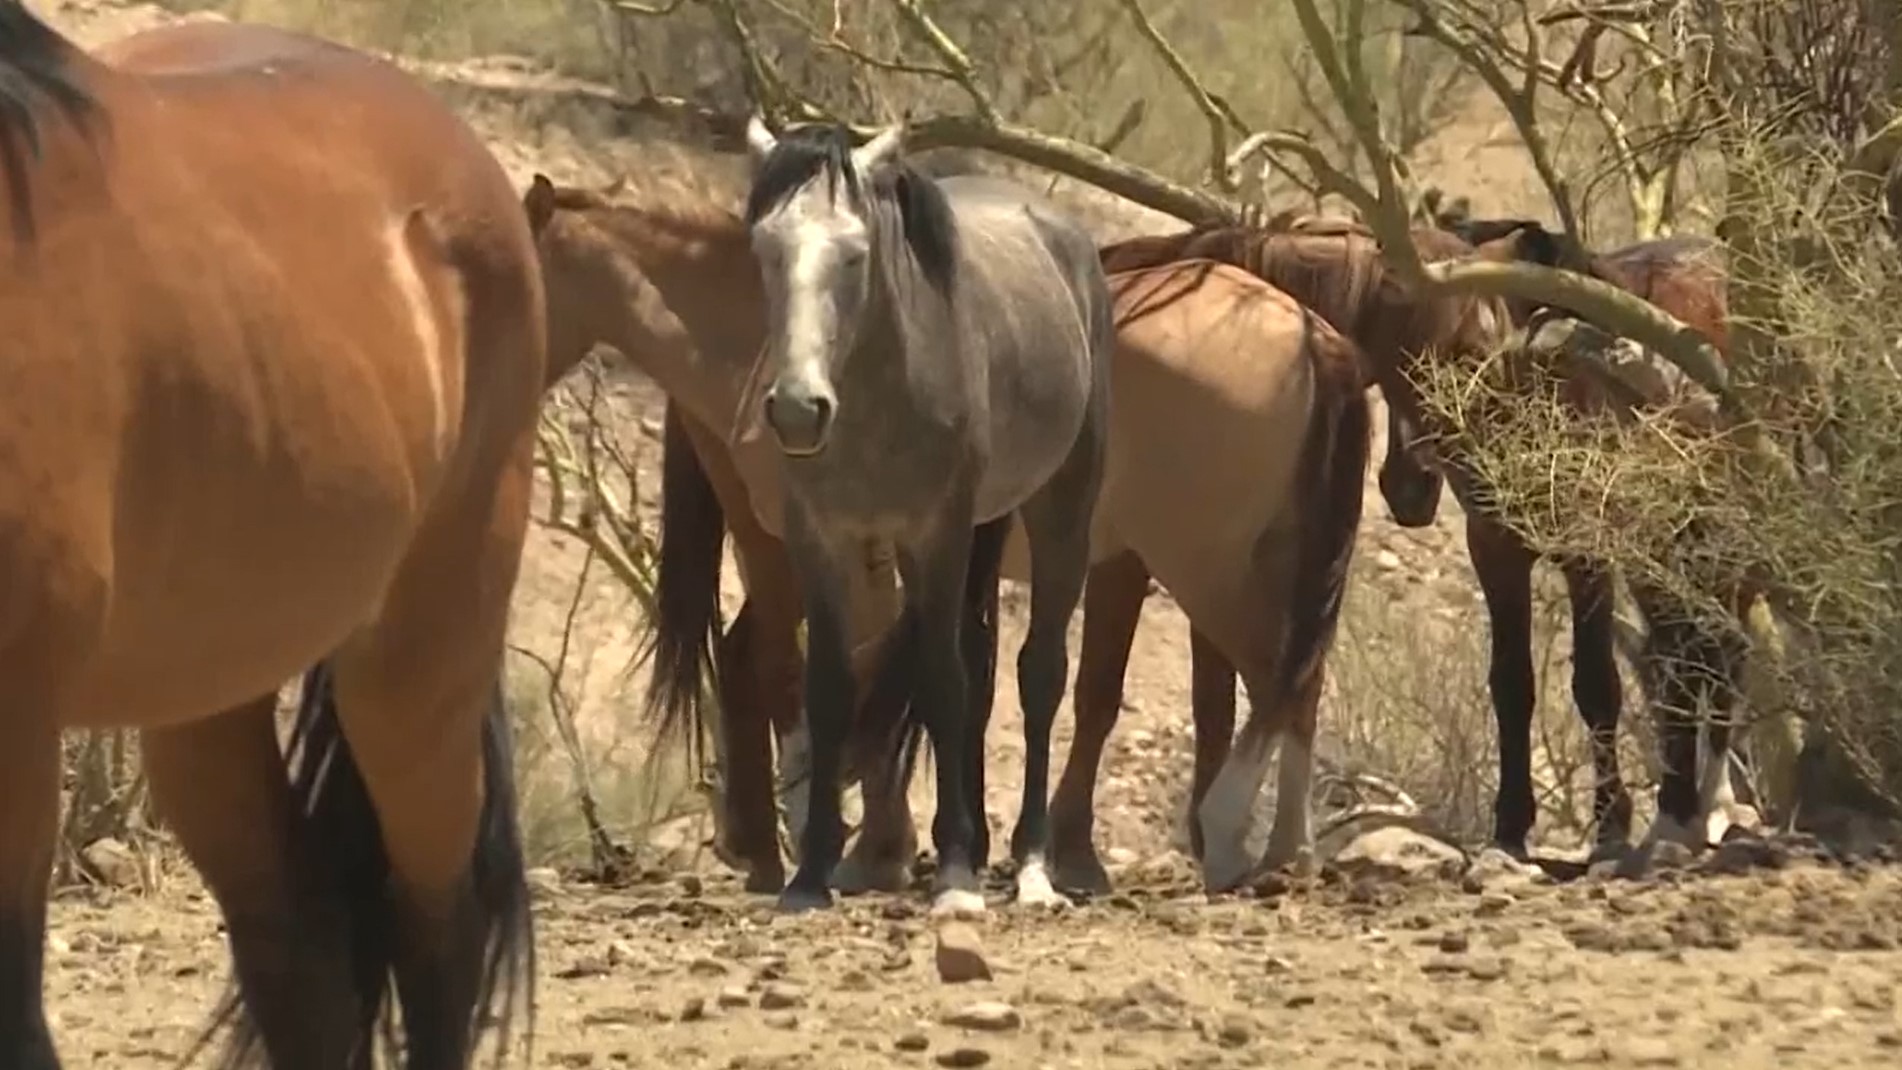 Alpine wild horse advocates are still out there every day